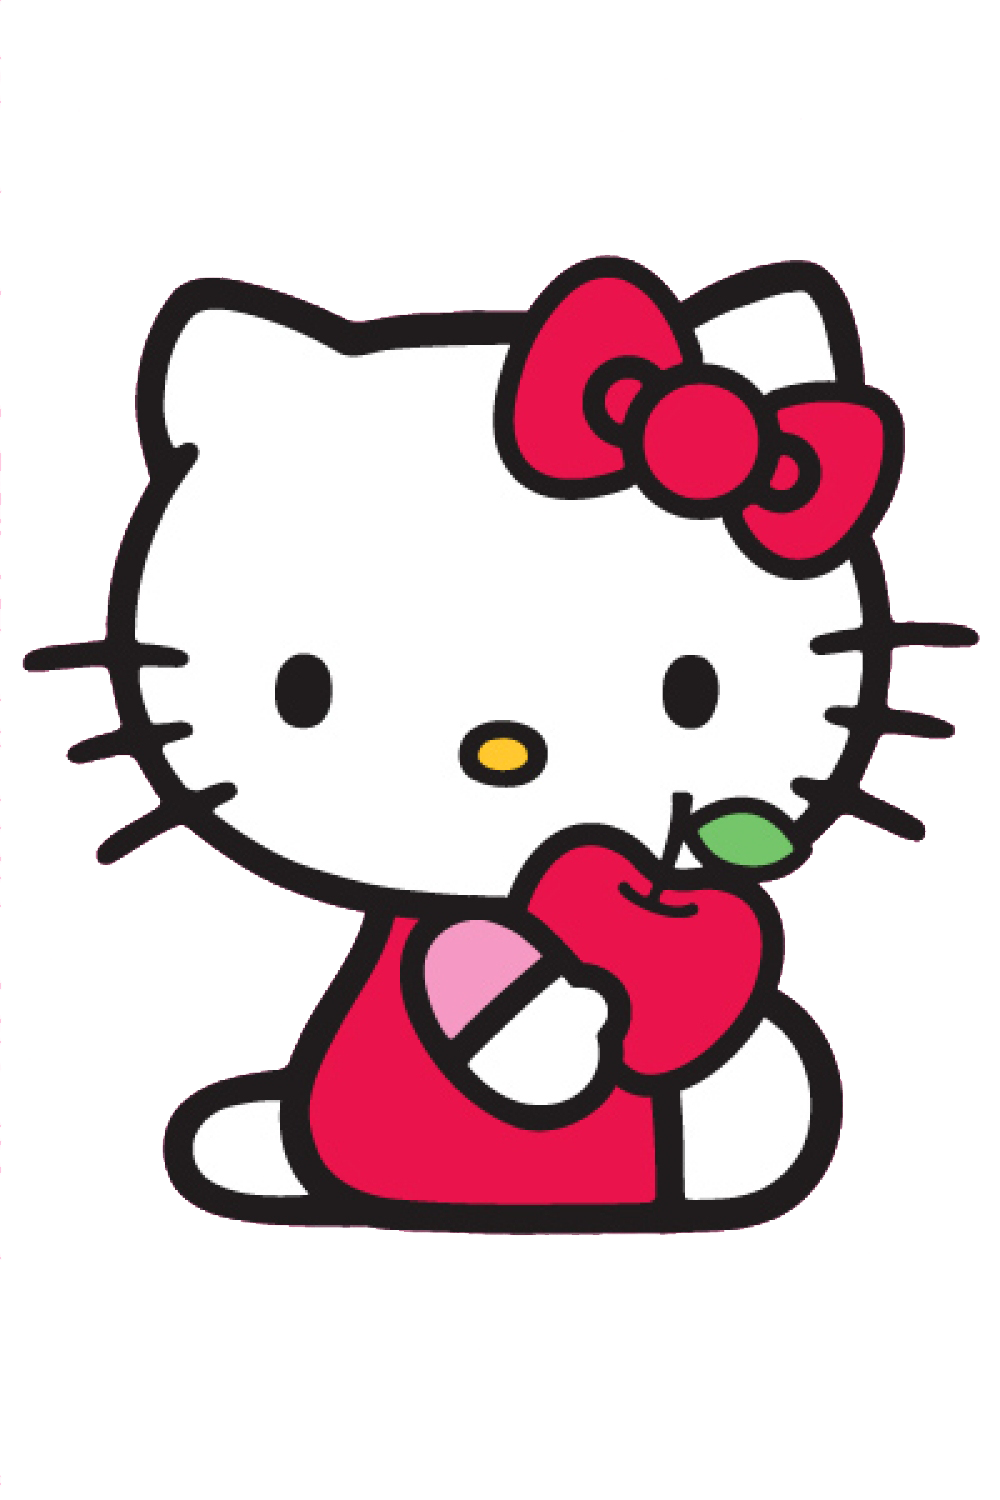 Get Your Hello Kitty Custom T-shirts Or Phone Cases - Angry Hello Kitty -  Free Transparent PNG Clipart Images Download